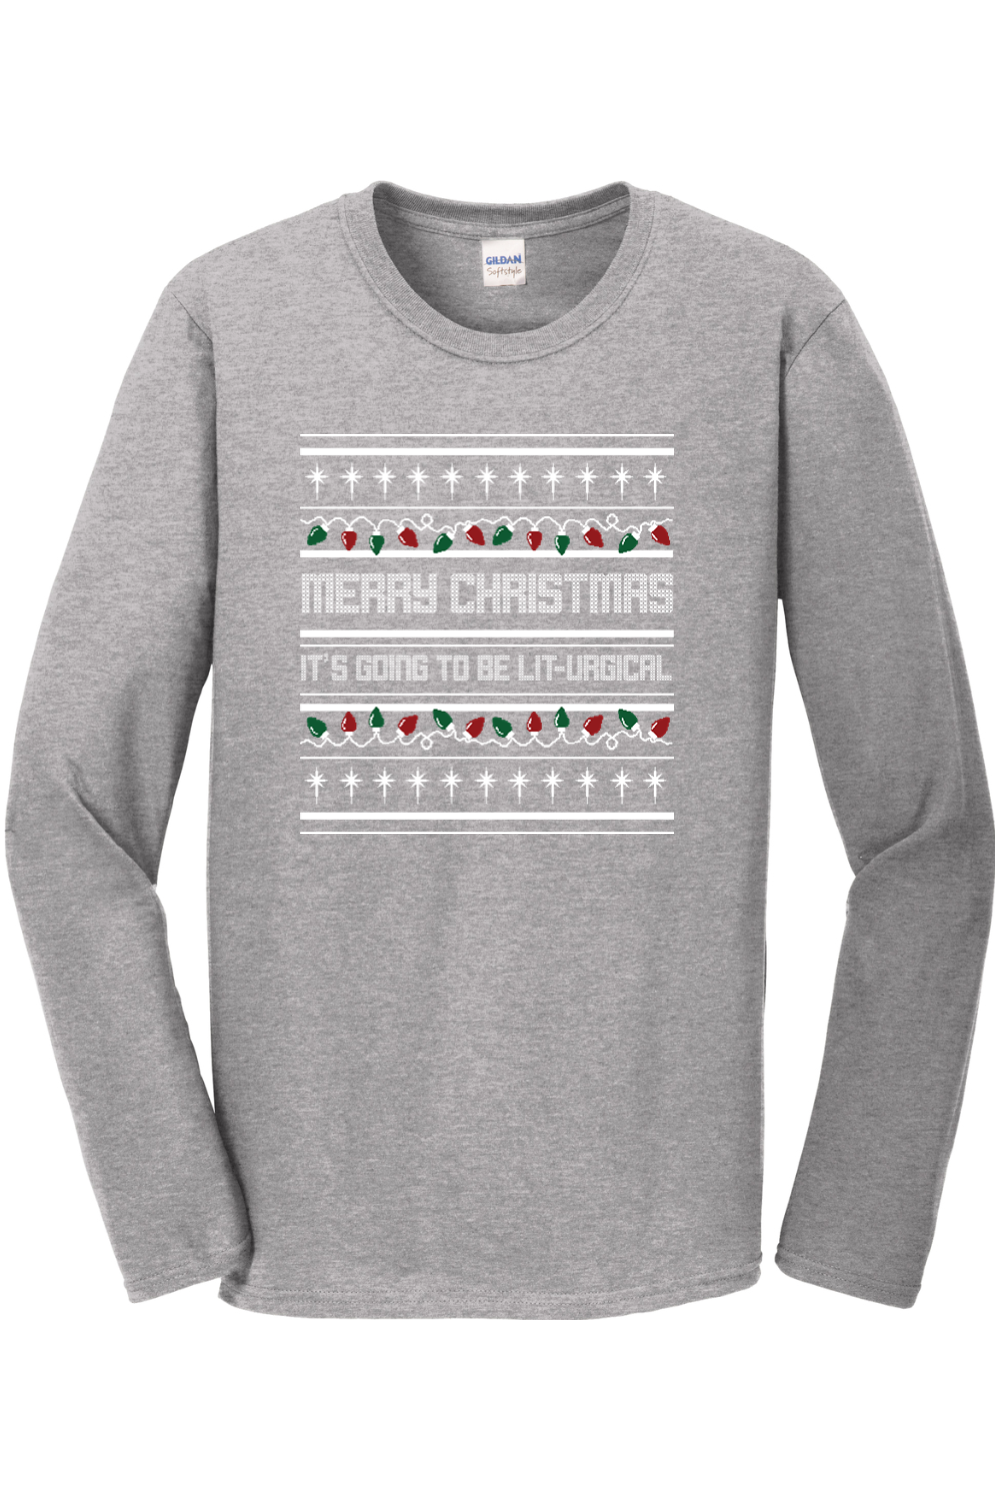 It's Going to be Lit-urgical! - Christmas Long Sleeve